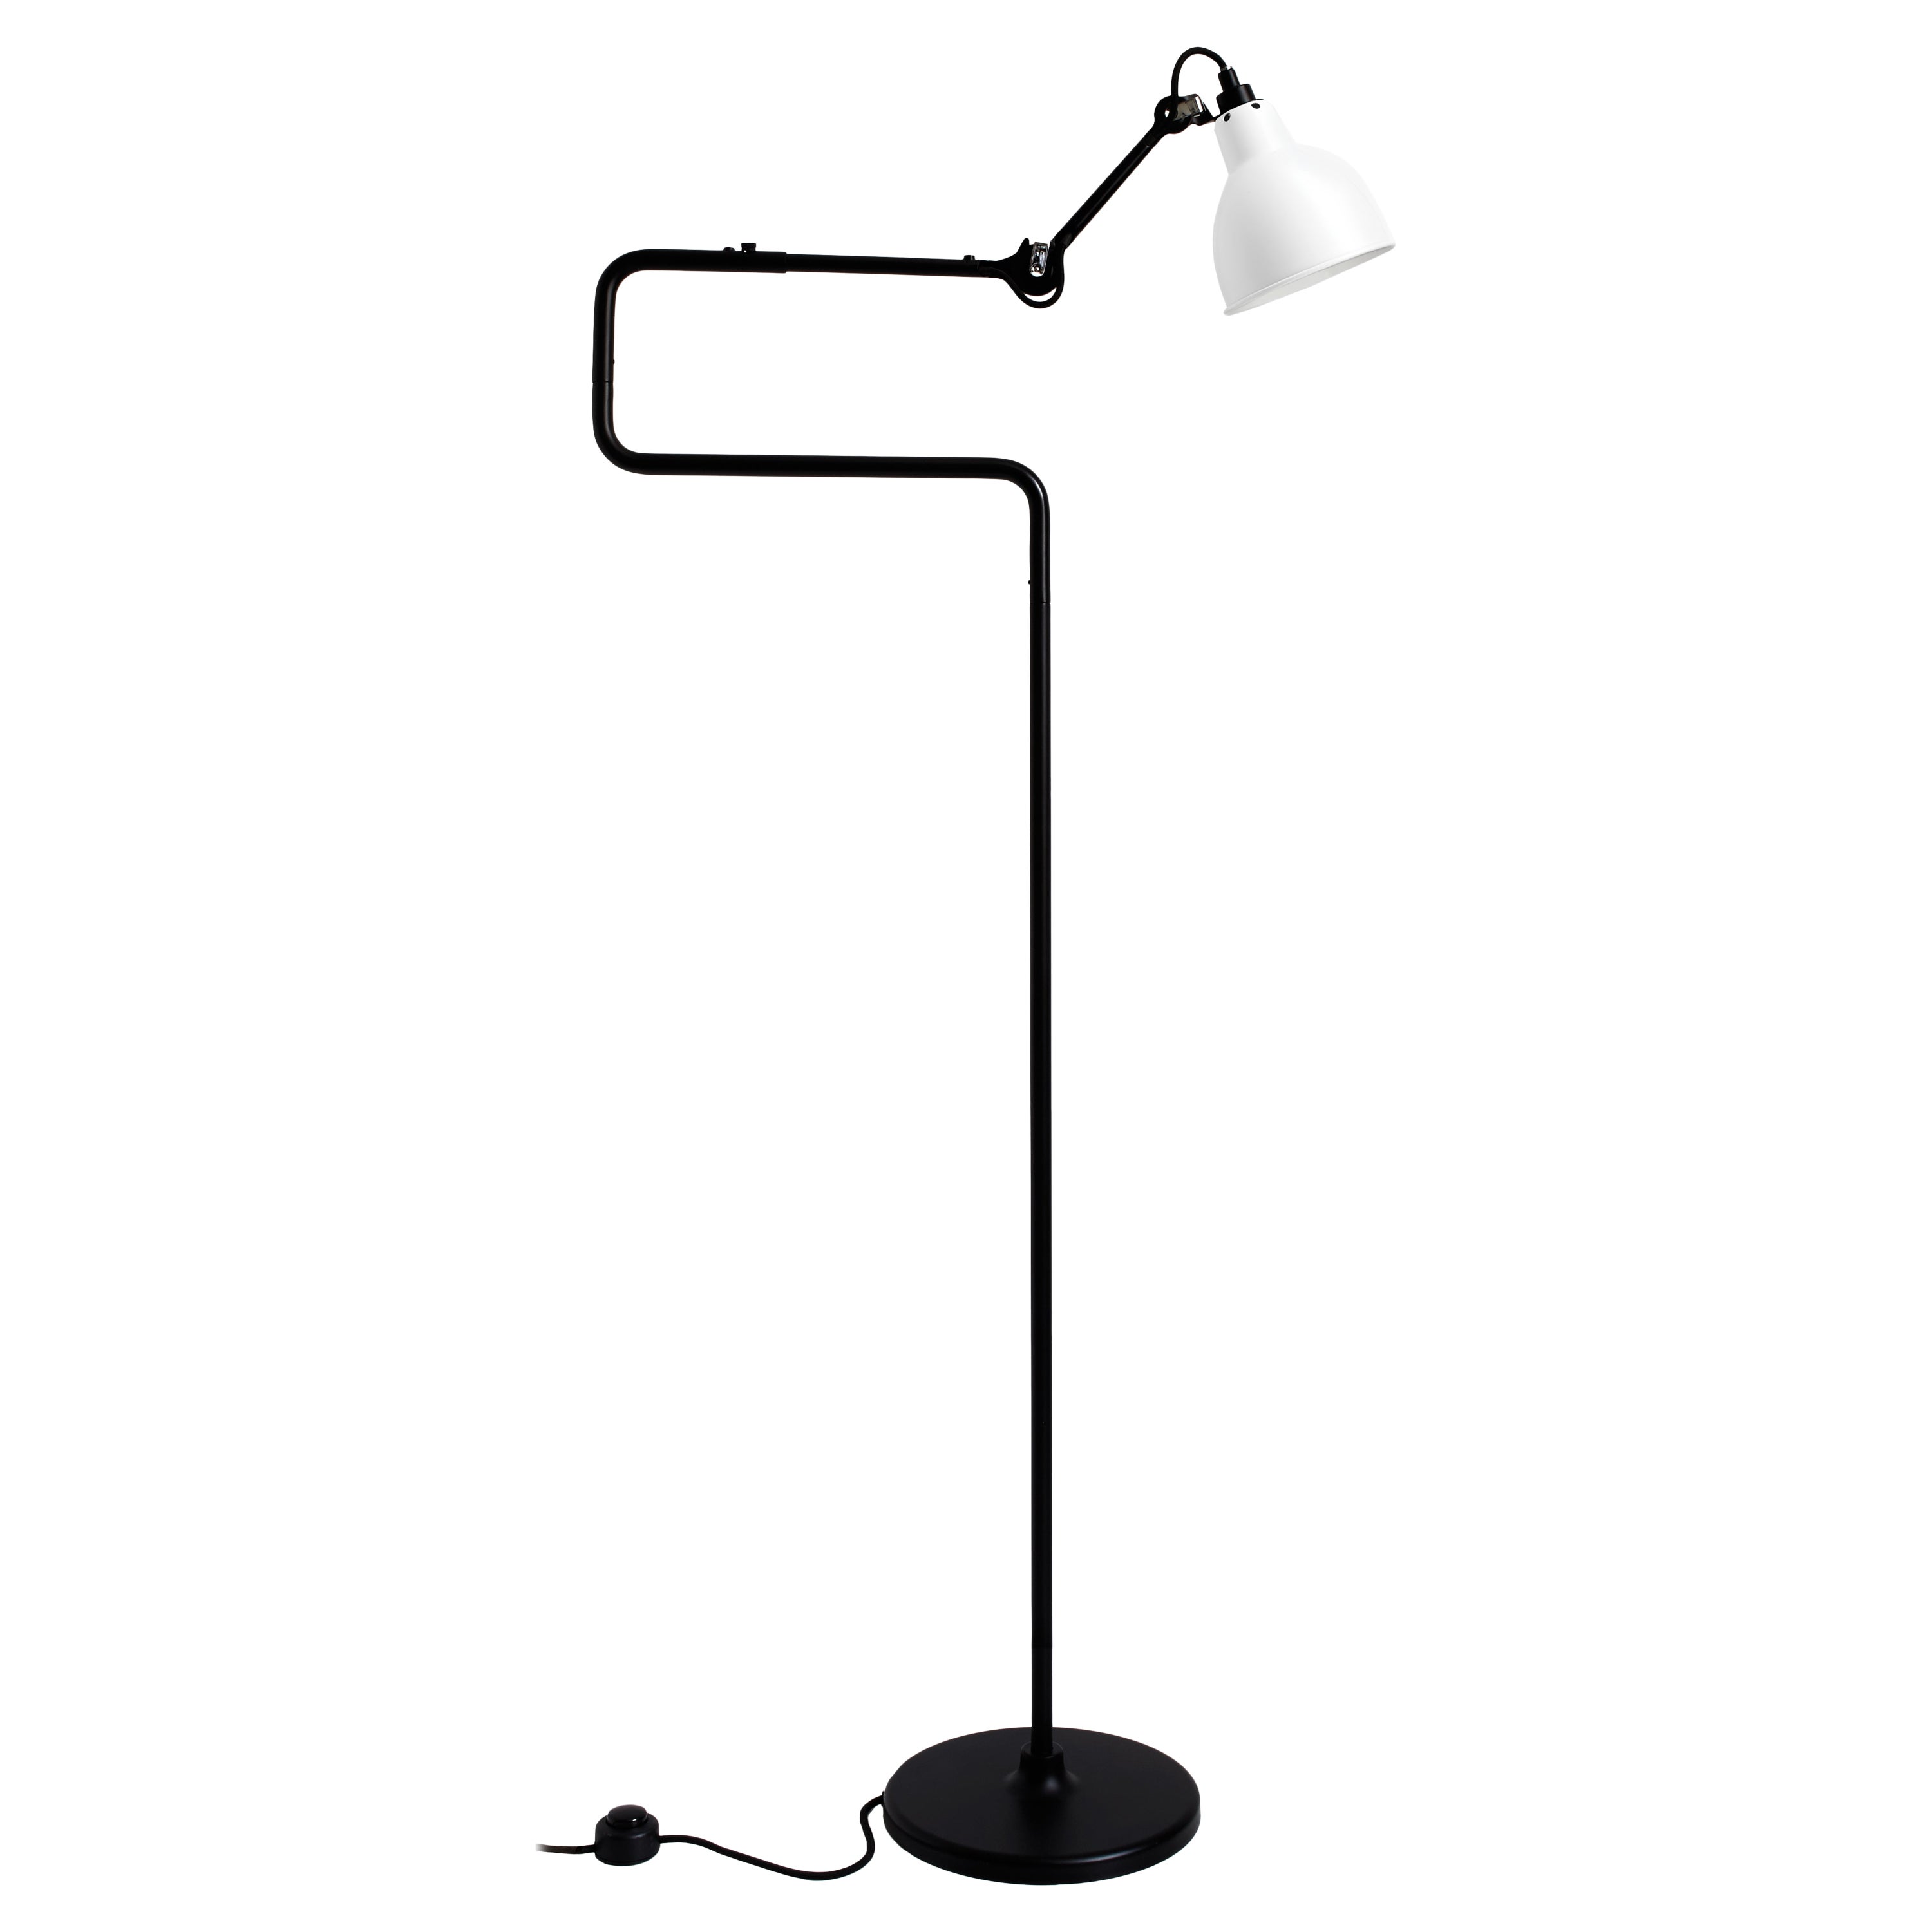 DCW Editions La Lampe Gras N°411 Floor Lamp in Black Arm and White Shade